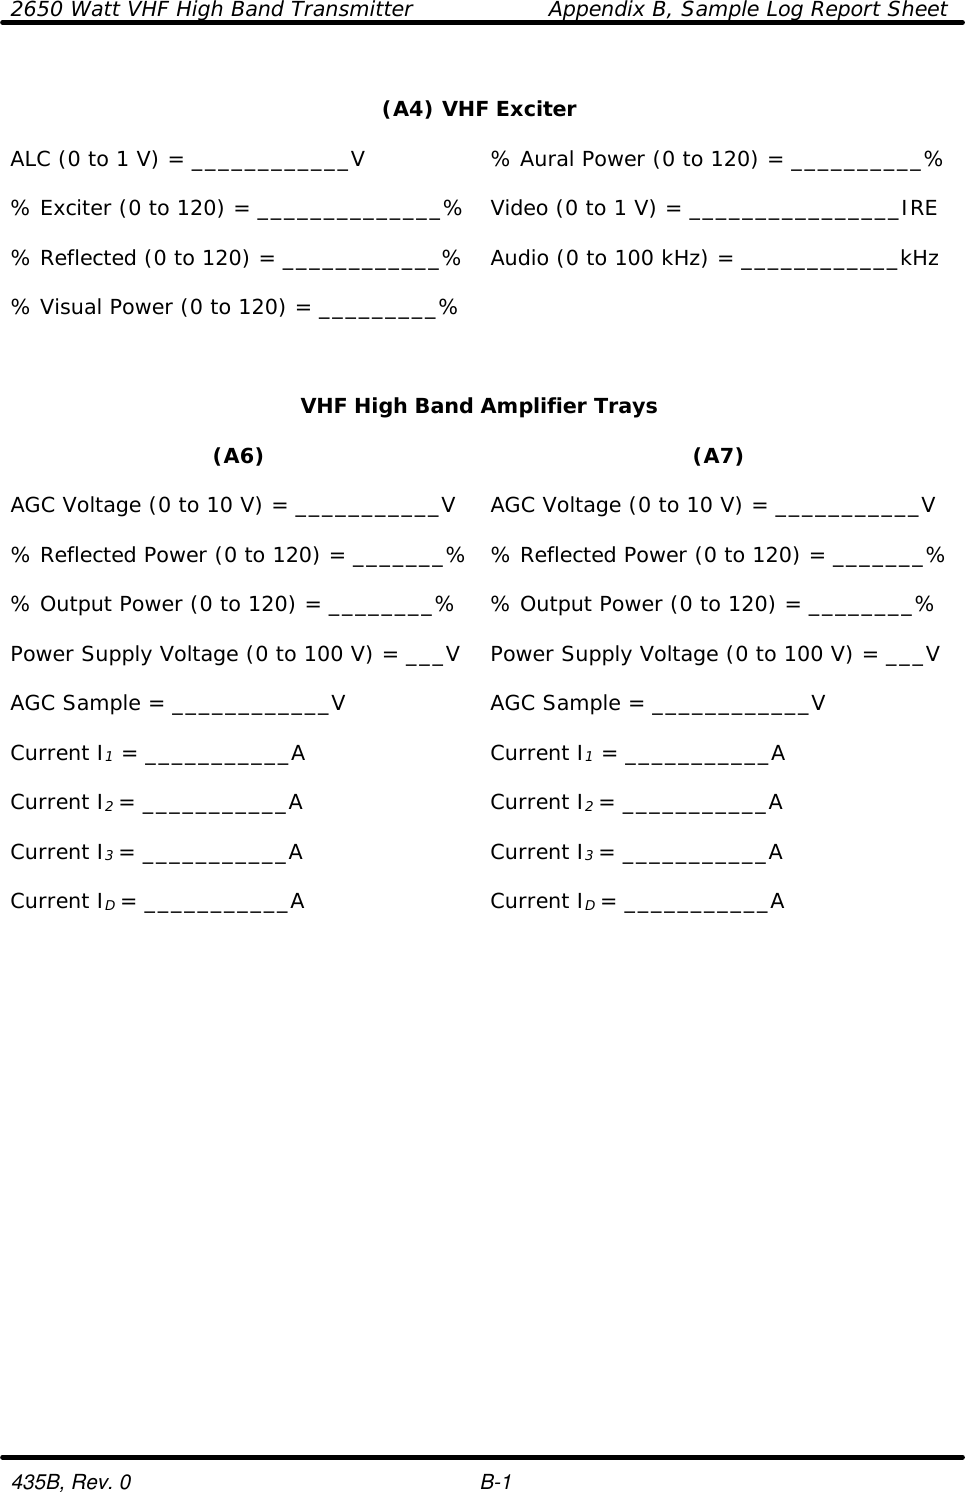 2650 Watt VHF High Band Transmitter    Appendix B, Sample Log Report Sheet  435B, Rev. 0    B-1  (A4) VHF Exciter    ALC (0 to 1 V) = ____________V % Aural Power (0 to 120) = __________%    % Exciter (0 to 120) = ______________% Video (0 to 1 V) = ________________IRE    % Reflected (0 to 120) = ____________% Audio (0 to 100 kHz) = ____________kHz    % Visual Power (0 to 120) = _________%      VHF High Band Amplifier Trays    (A6) (A7)    AGC Voltage (0 to 10 V) = ___________V AGC Voltage (0 to 10 V) = ___________V    % Reflected Power (0 to 120) = _______% % Reflected Power (0 to 120) = _______%    % Output Power (0 to 120) = ________% % Output Power (0 to 120) = ________%    Power Supply Voltage (0 to 100 V) = ___V Power Supply Voltage (0 to 100 V) = ___V    AGC Sample = ____________V AGC Sample = ____________V    Current I1 = ___________A Current I1 = ___________A    Current I2 = ___________A Current I2 = ___________A    Current I3 = ___________A Current I3 = ___________A    Current ID = ___________A Current ID = ___________A        